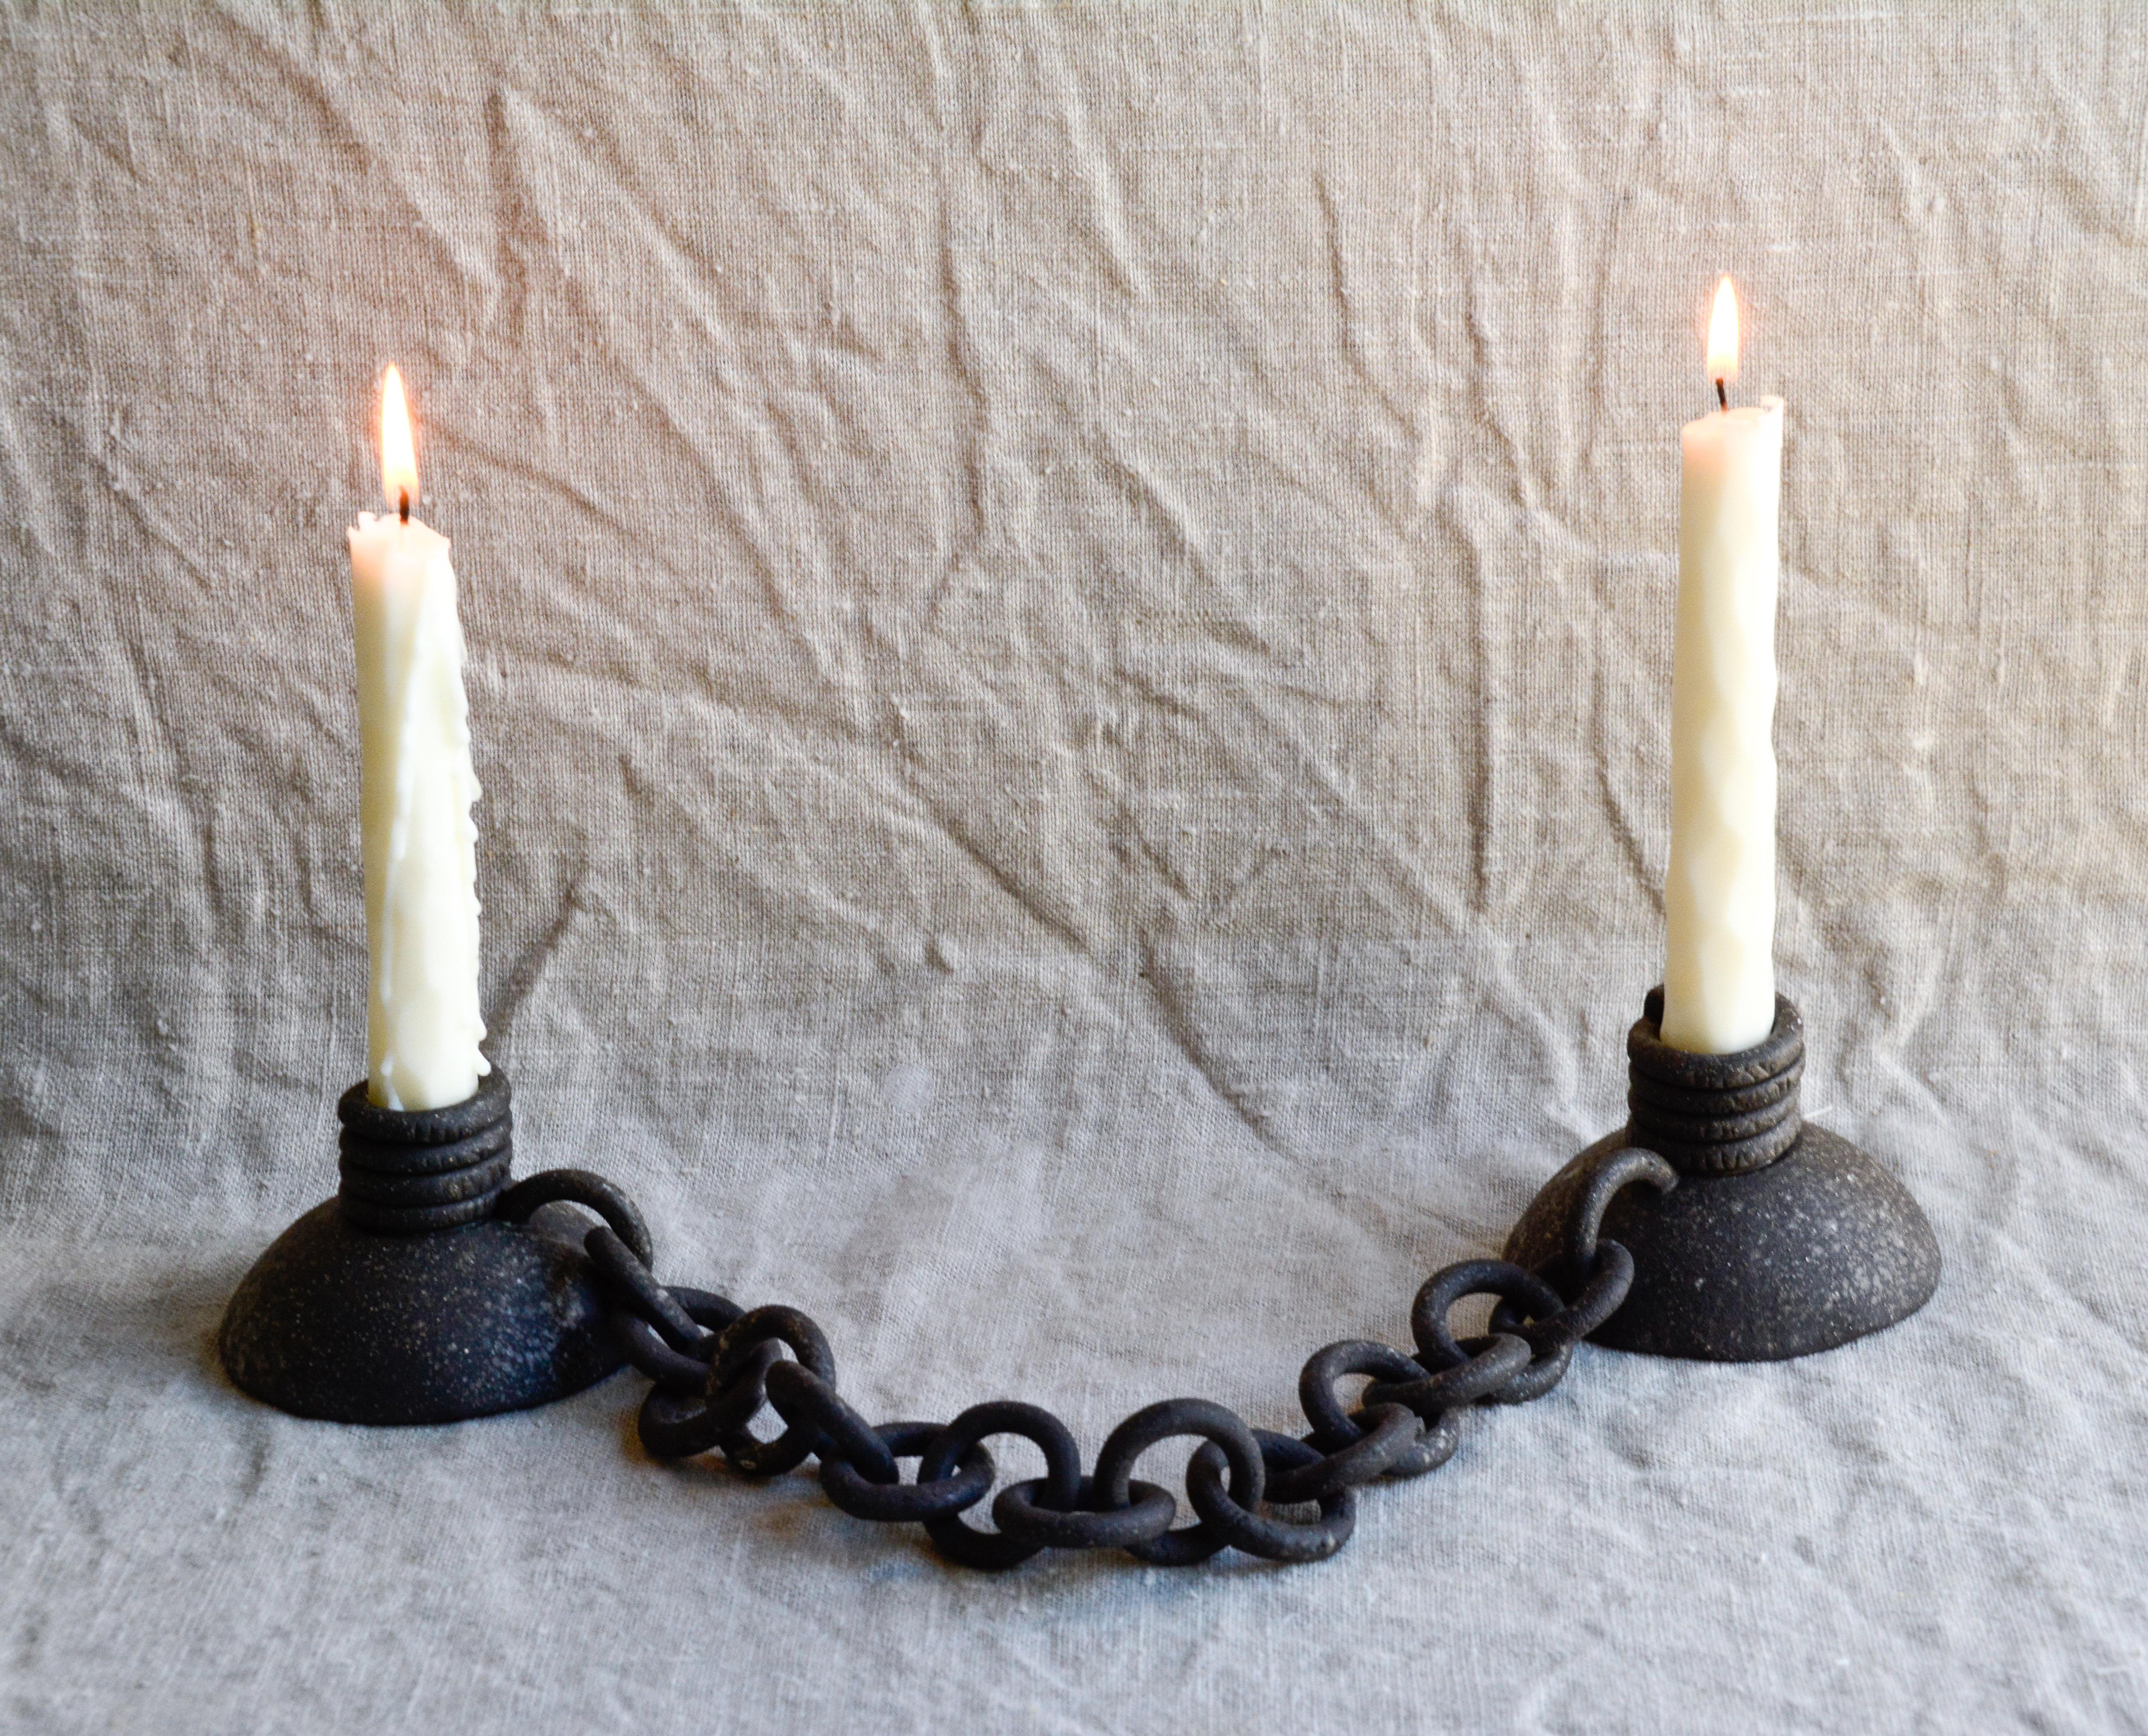 A truly unique candlestick holder that add a touch of eclecticism and mysticism to your space, reflecting the strong connections that light builds in our inner selves and the bond that it creates in the darkness.
The candle holder also makes a